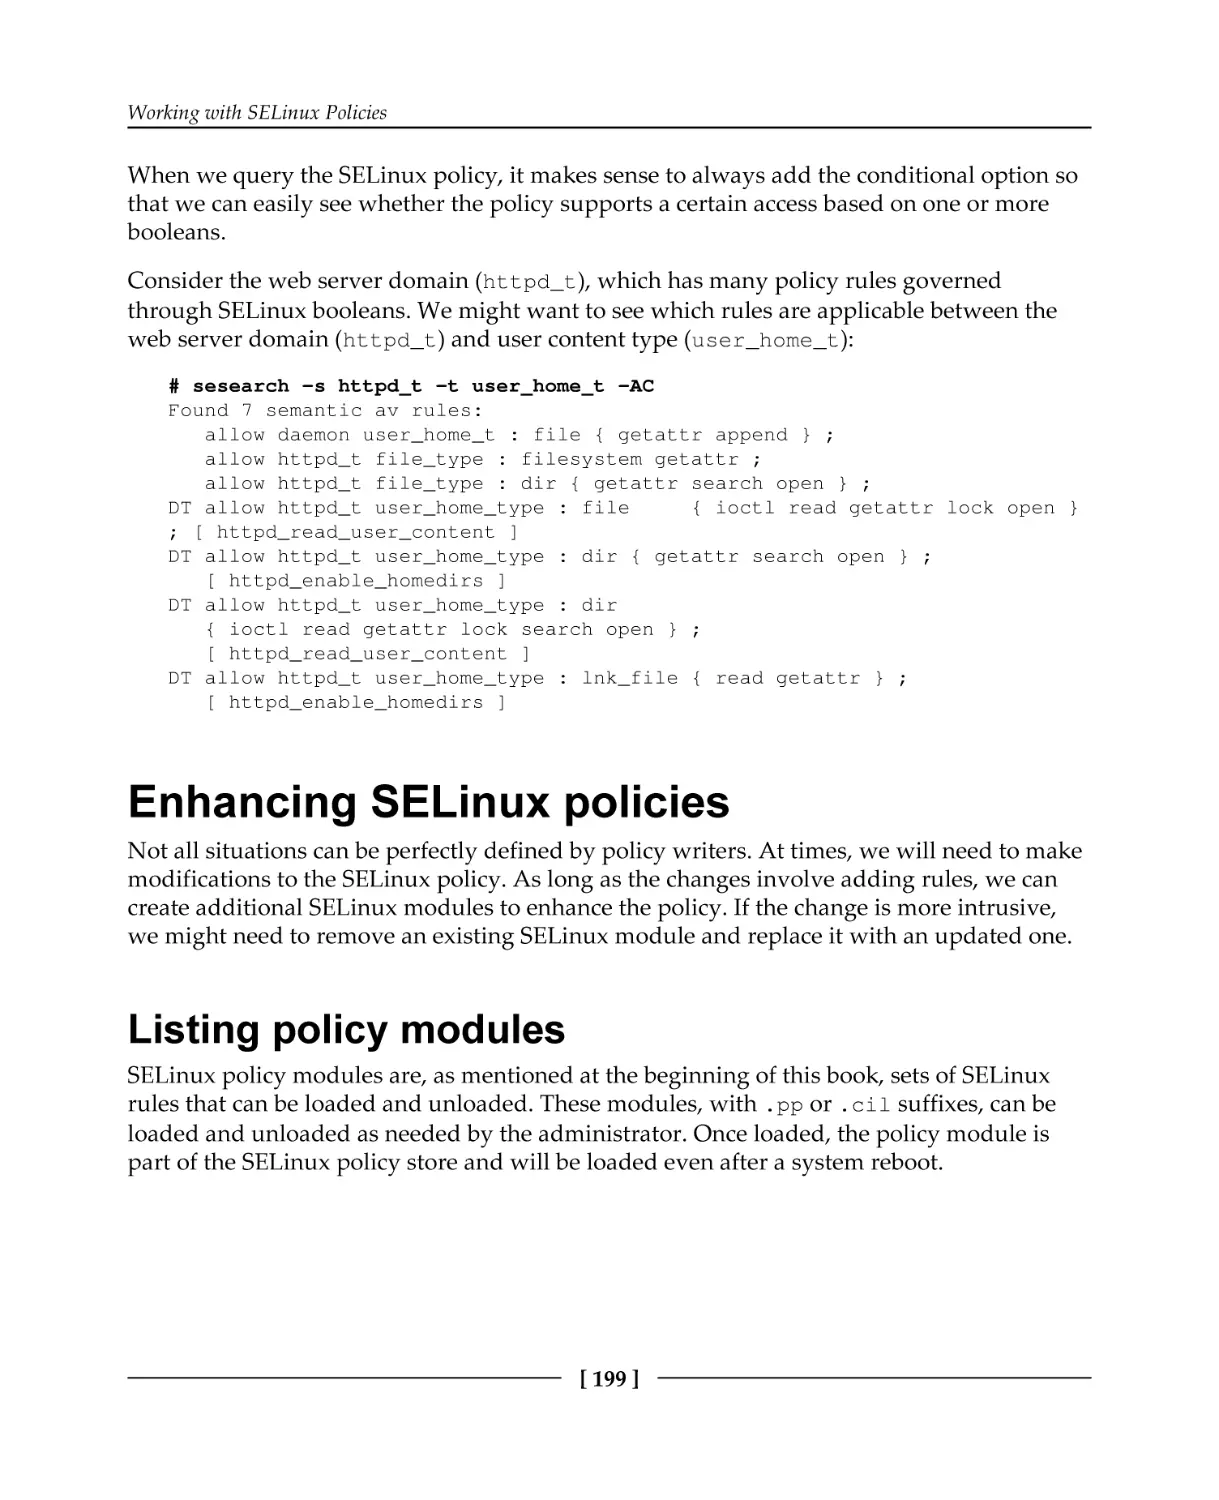 Enhancing SELinux policies
Listing policy modules